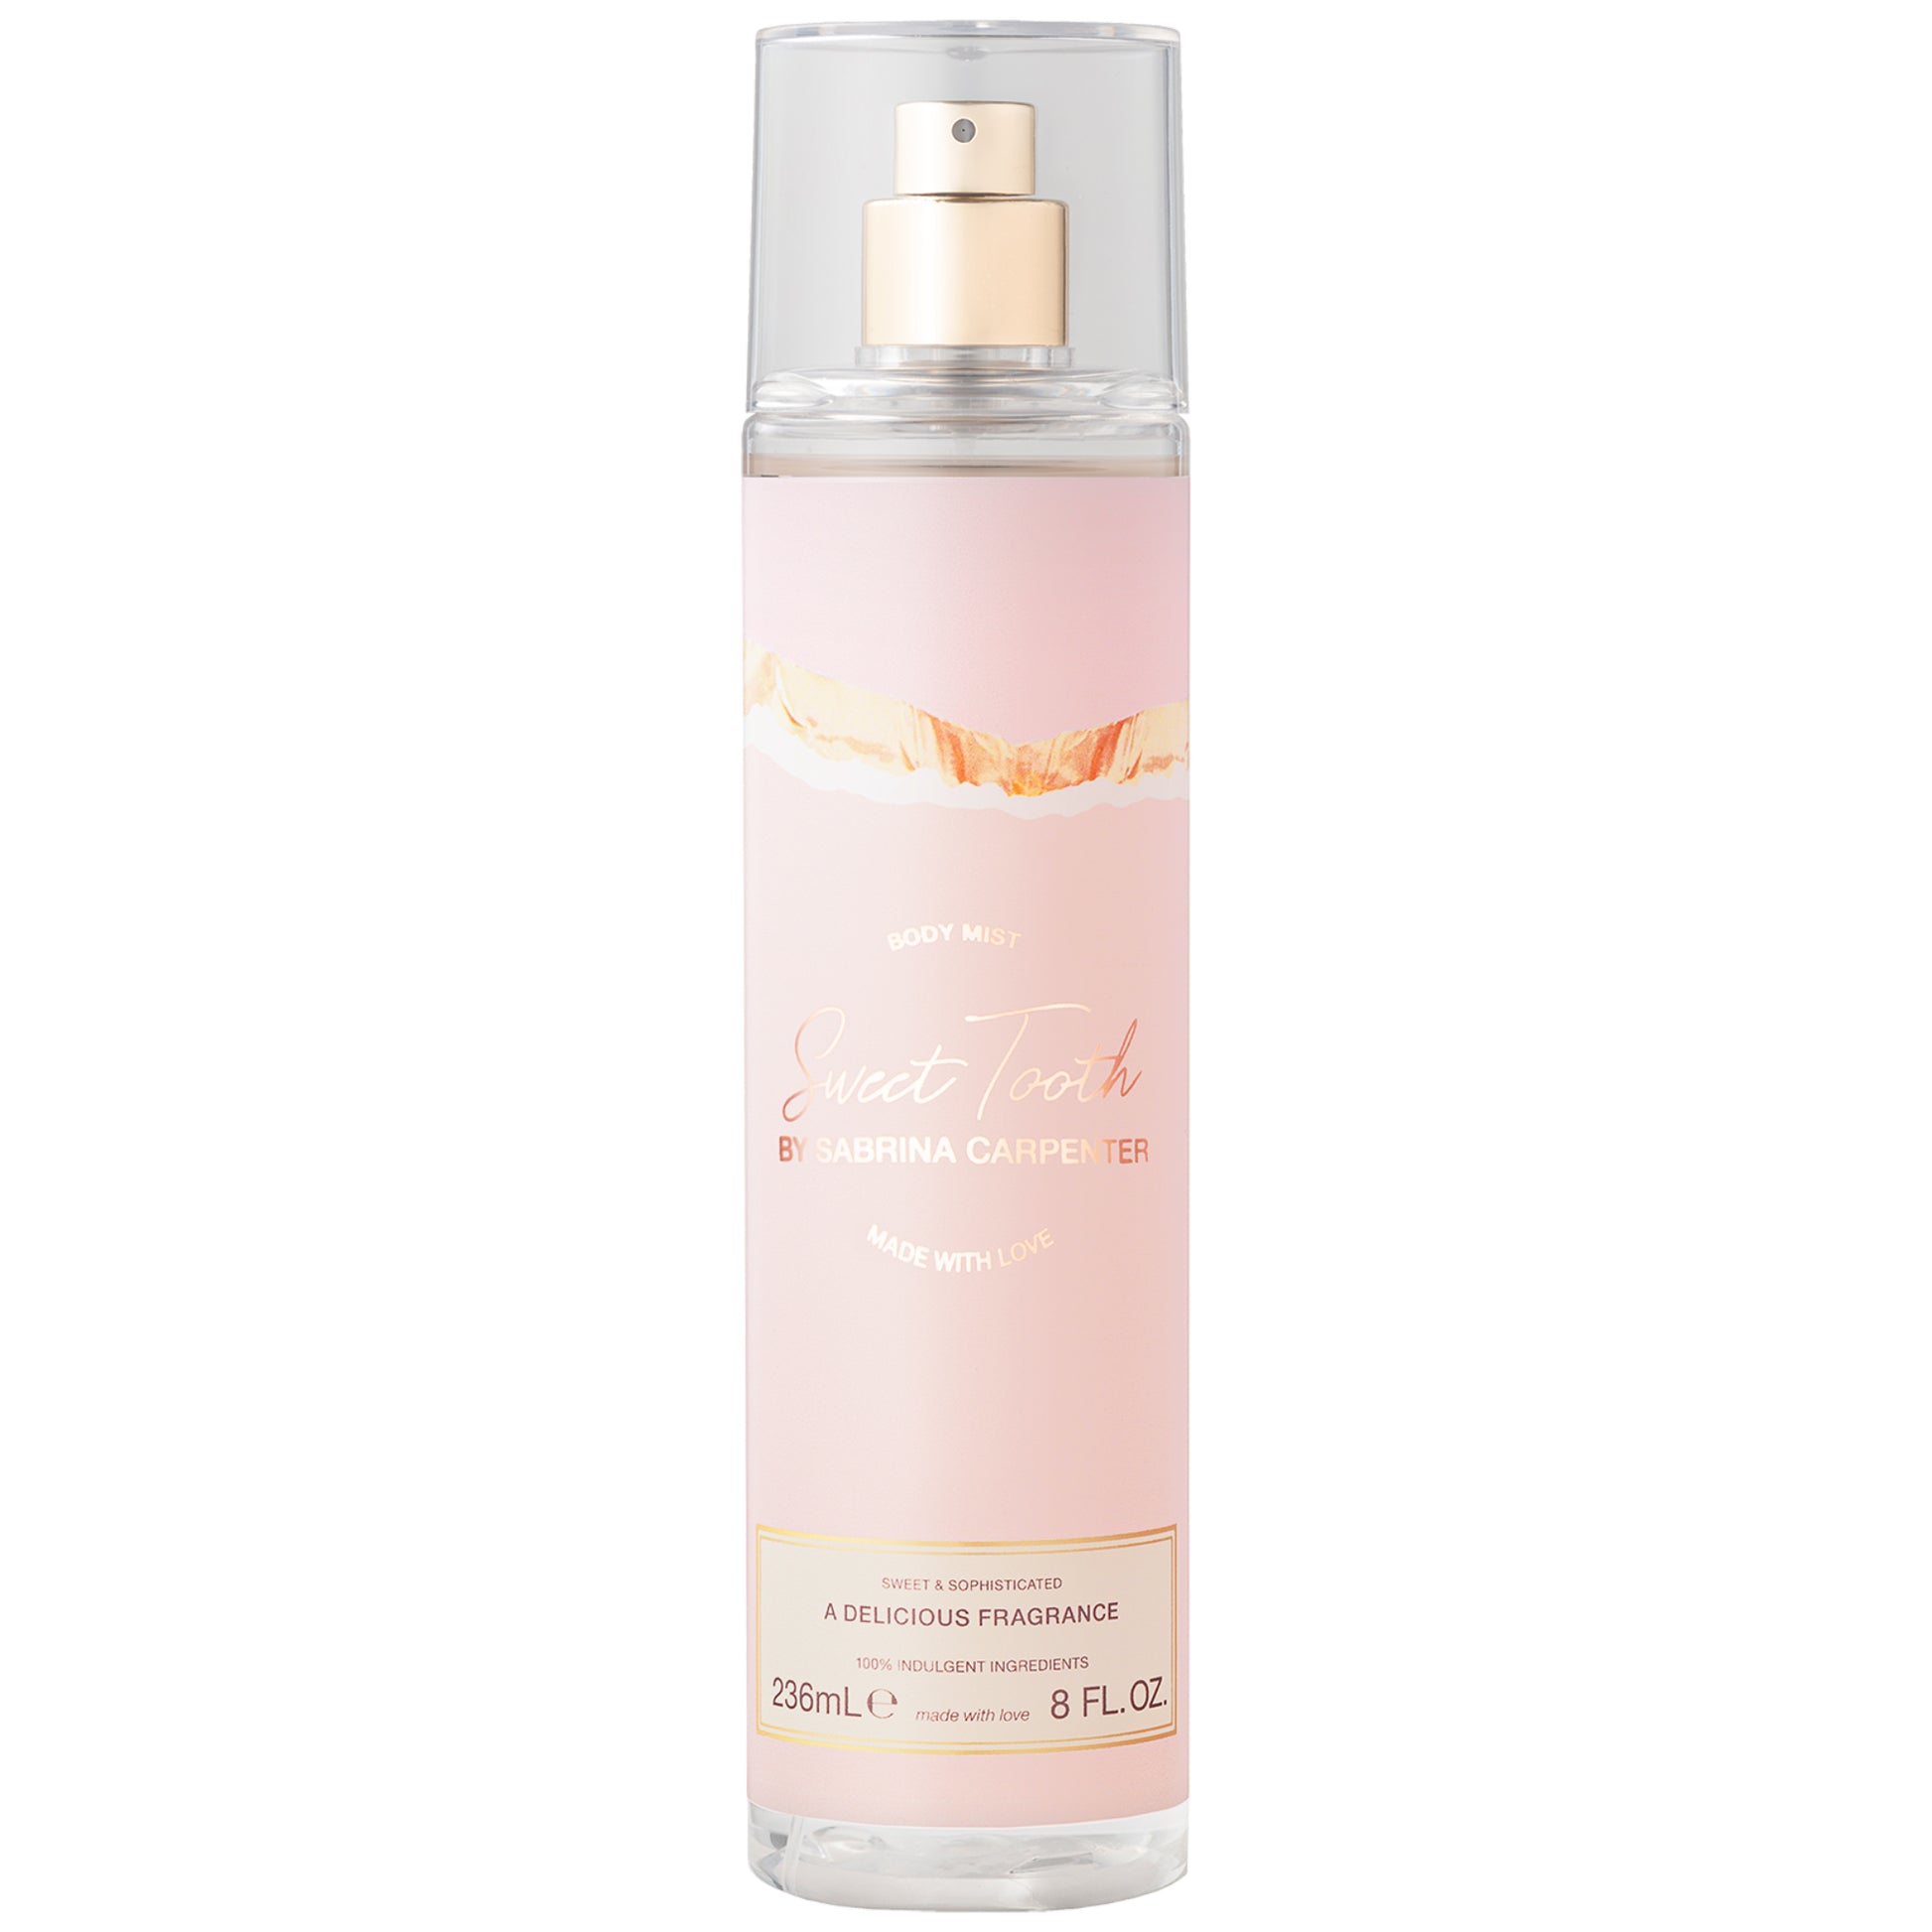 SWEET TOOTH BODY MIST - SCENT BEAUTY